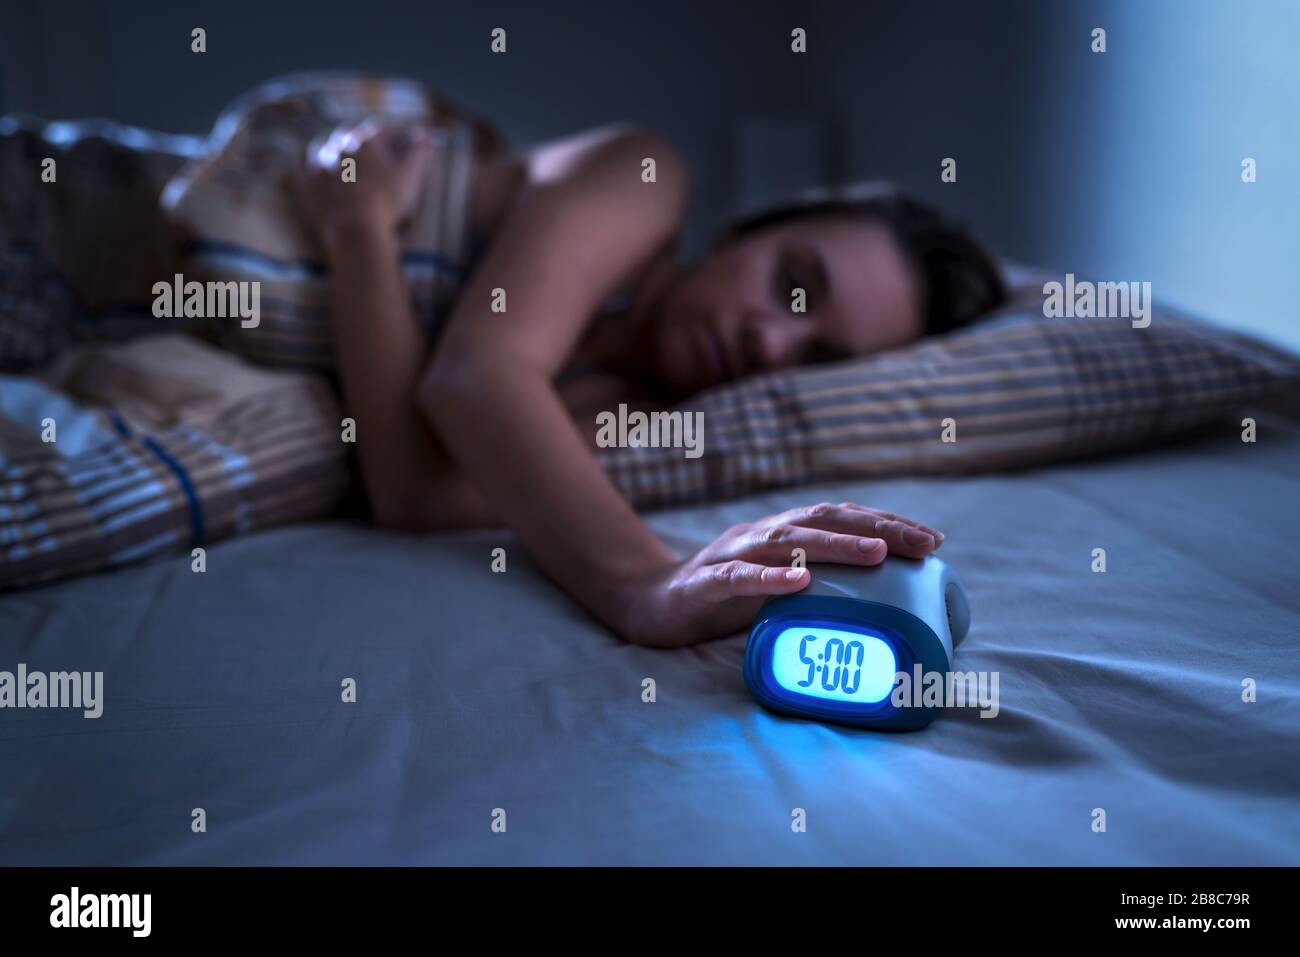 Tired woman waking up for work or school early in the morning. Grumpy lady pushing snooze button or turning off alarm clock with hand. Stock Photo